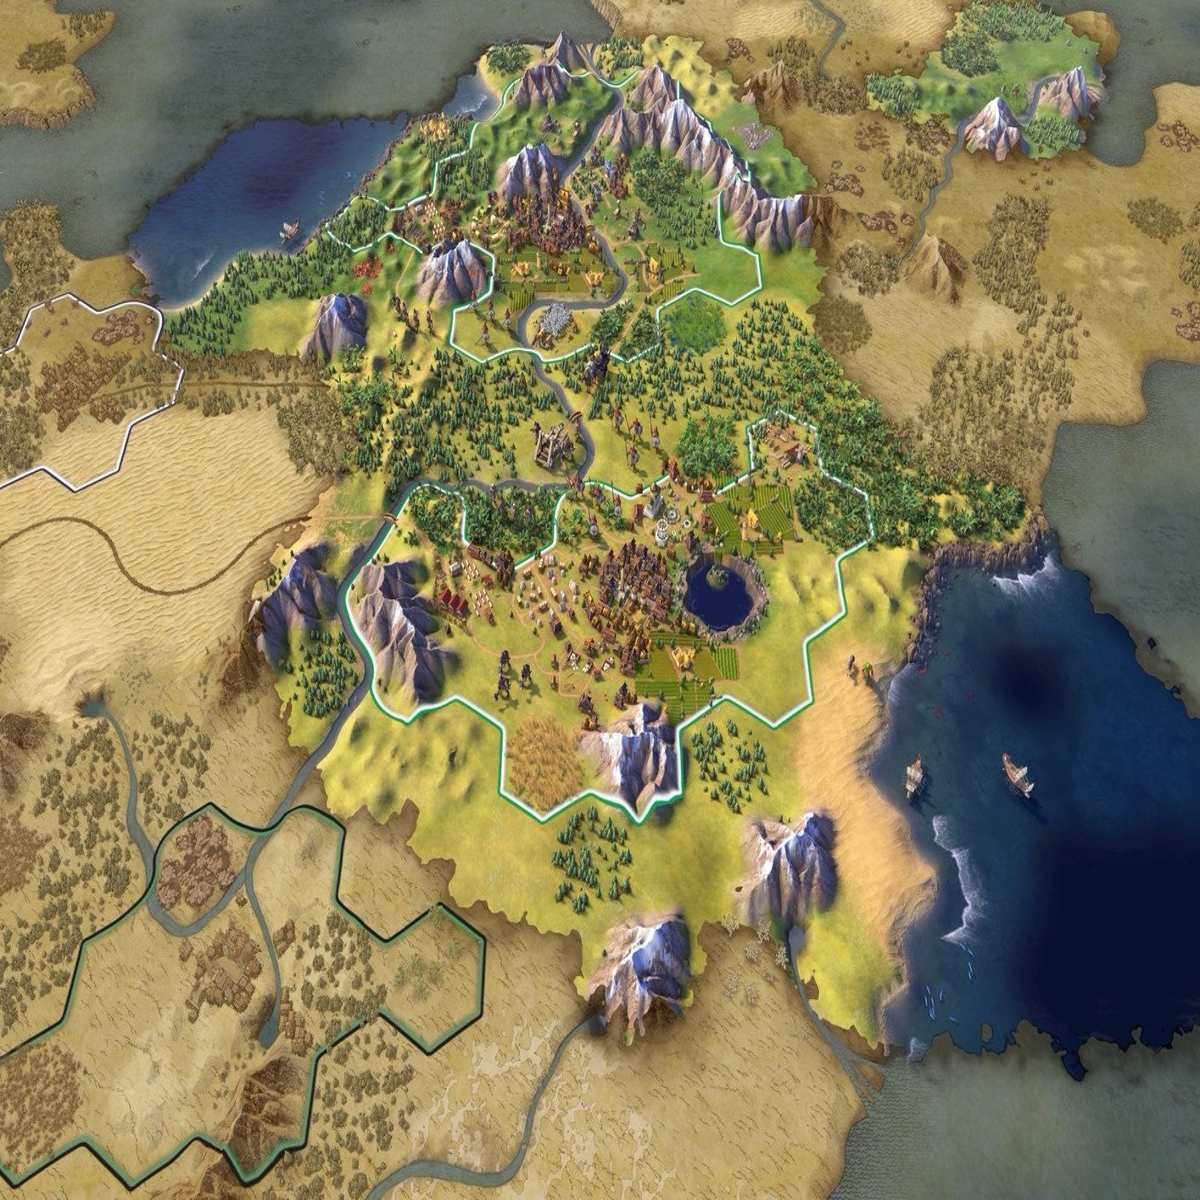 abort Sjældent Byttehandel Civilization 6 strategies - How to master the early game, mid-game and late  game phases | Eurogamer.net